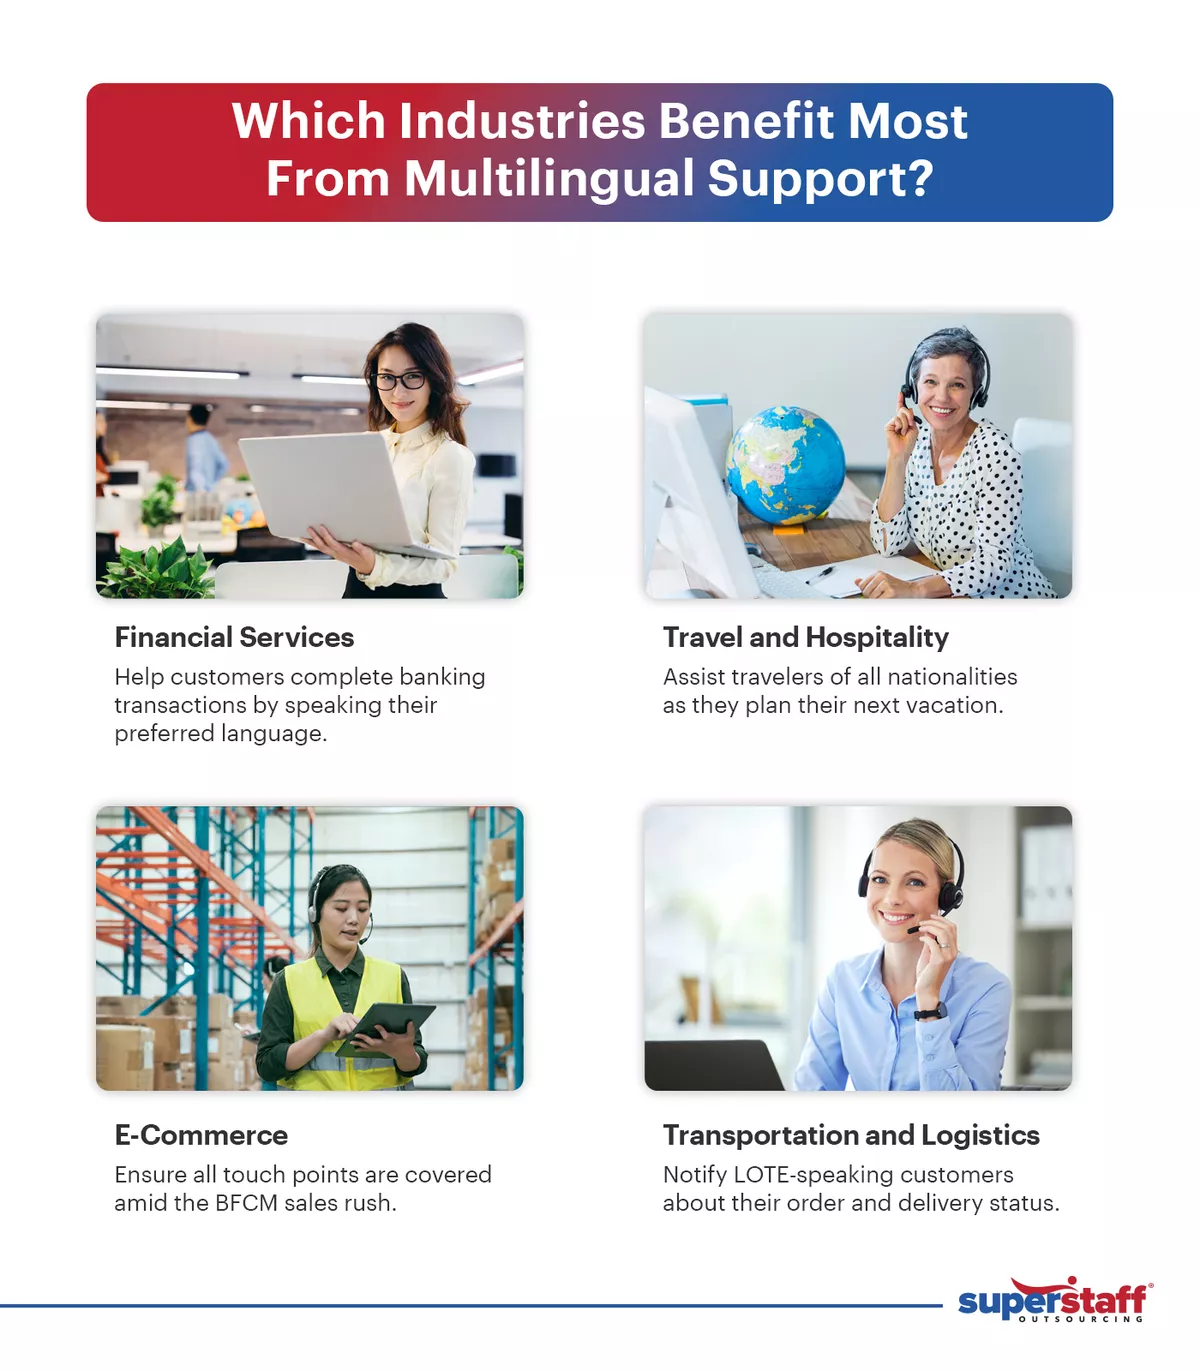 An infographic illustrating the industries that benefit most from multilingual customer services.